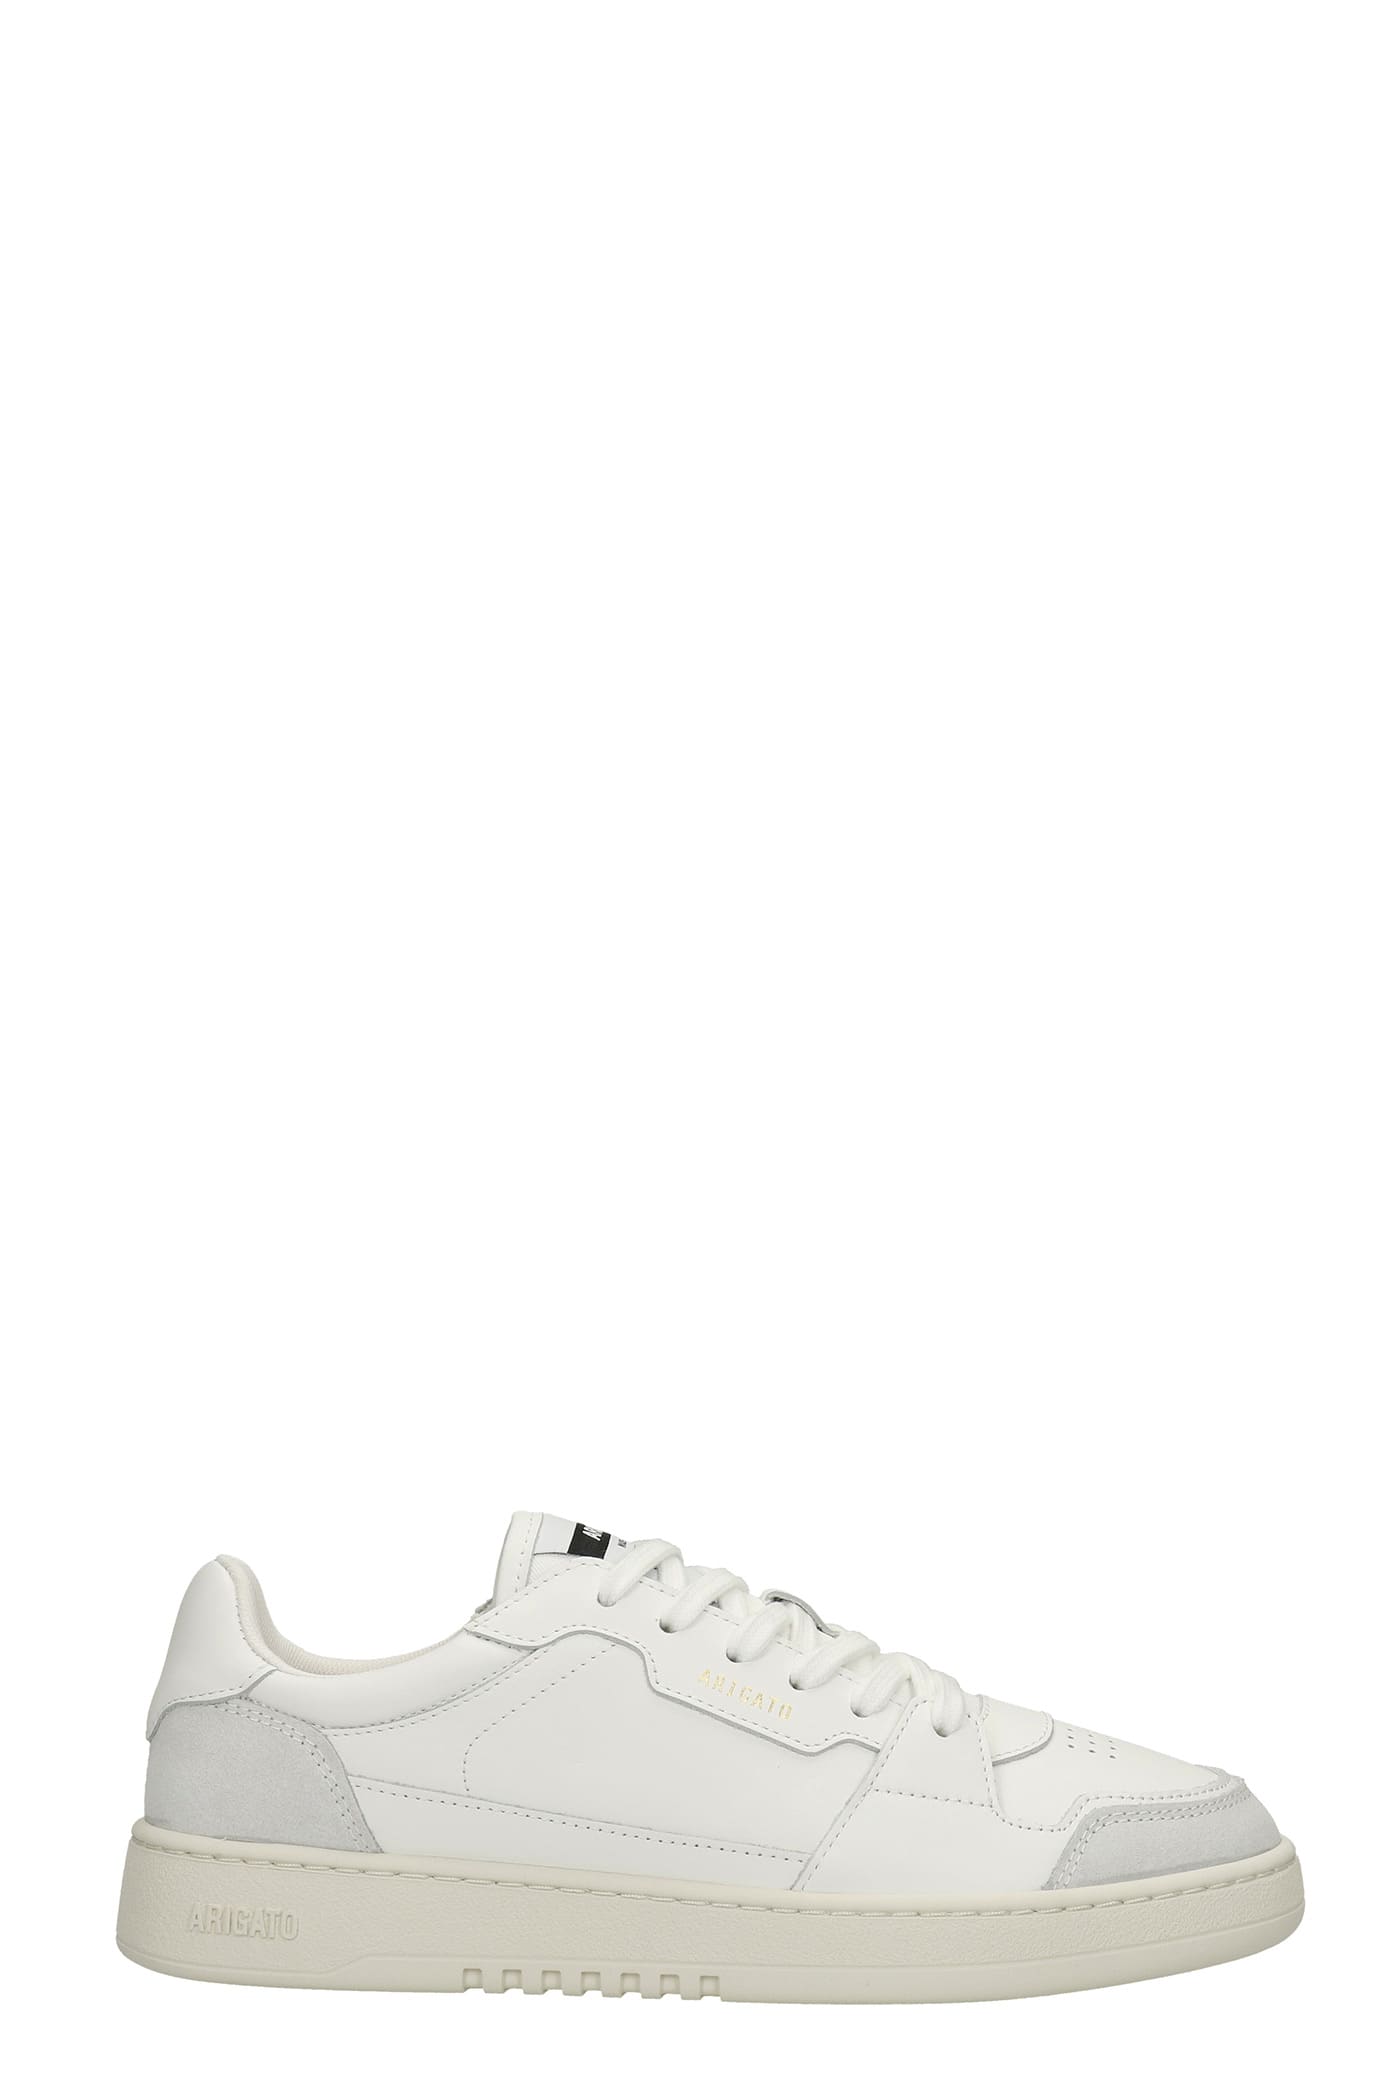 Axel Arigato Ace Lo Sneakers In White Leather